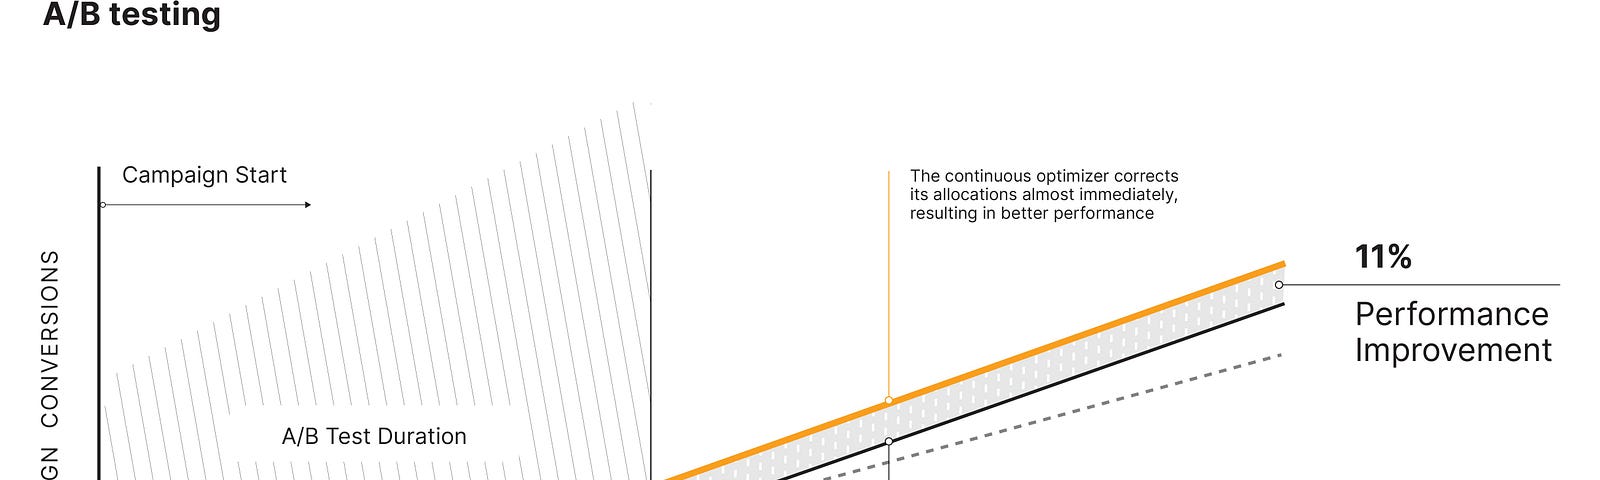 Figure 1 represents continuous campaign optimization outperforming traditional A/B testing.